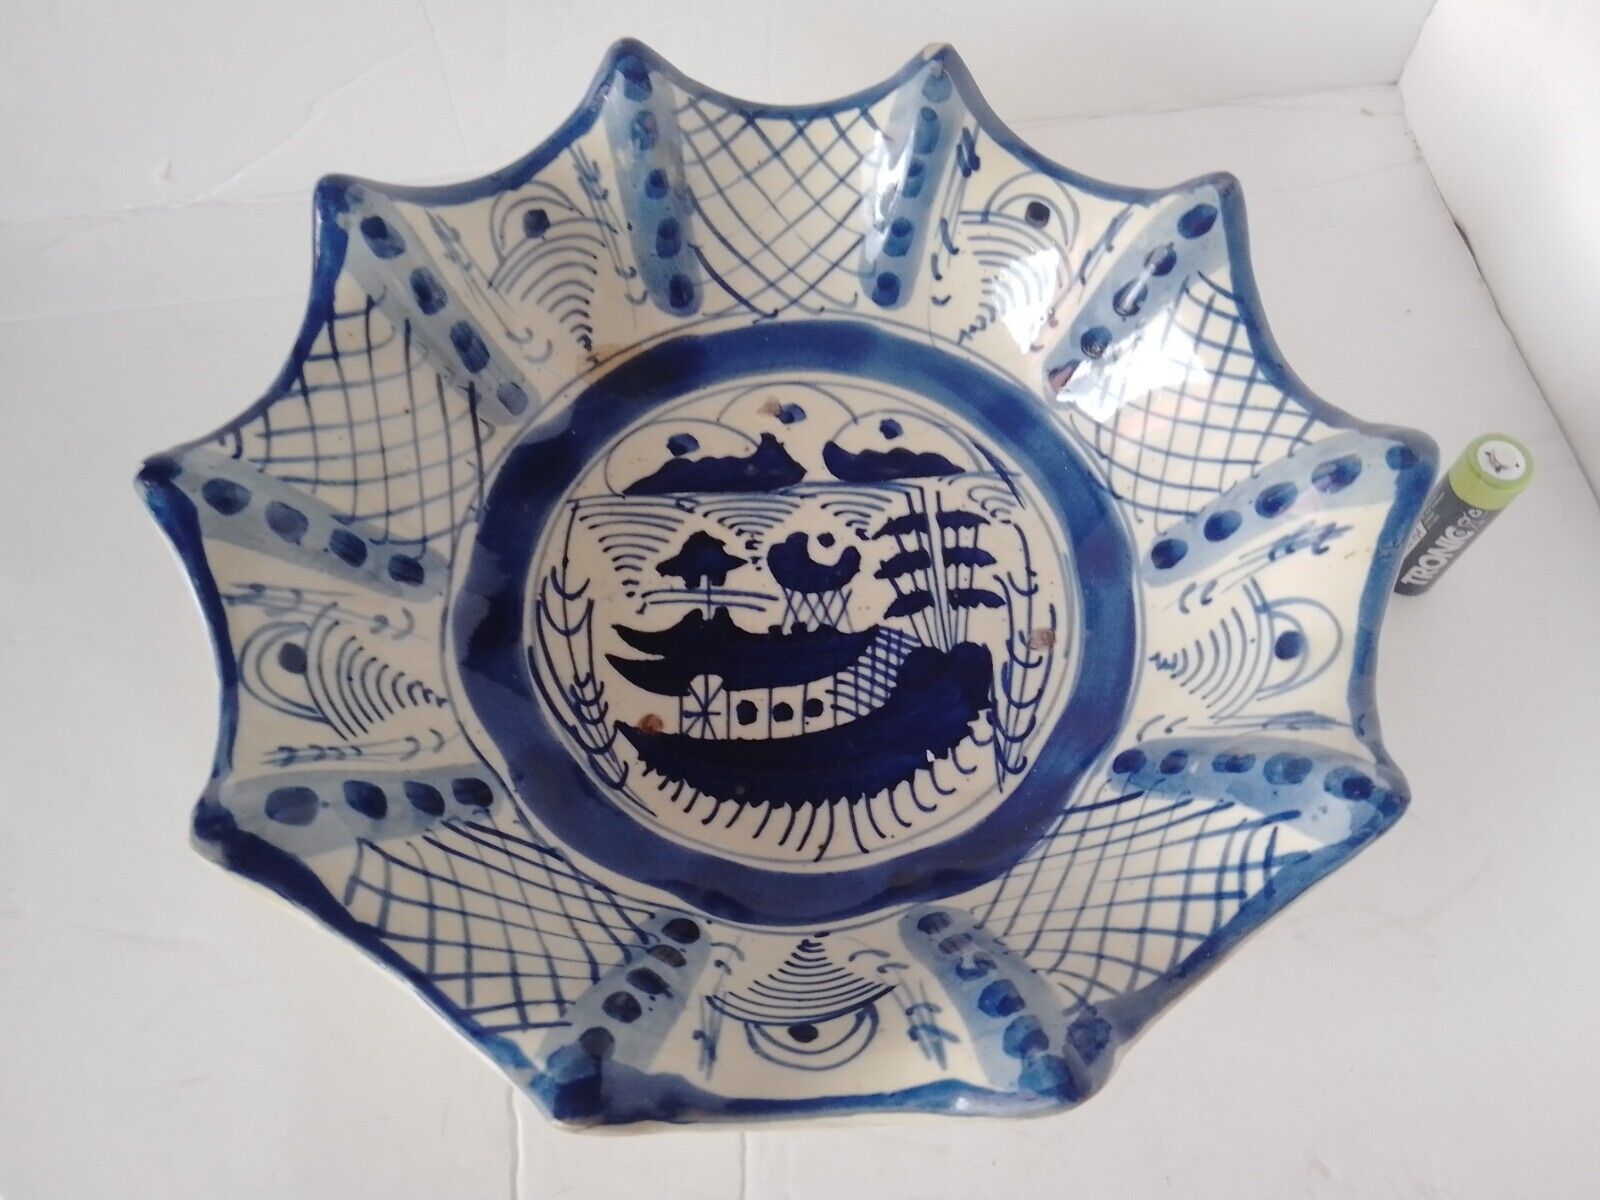 Antique Valuations: 18/19c Creamware or English / Dutch Delft ? Bowl w Chinoiserie Decoration